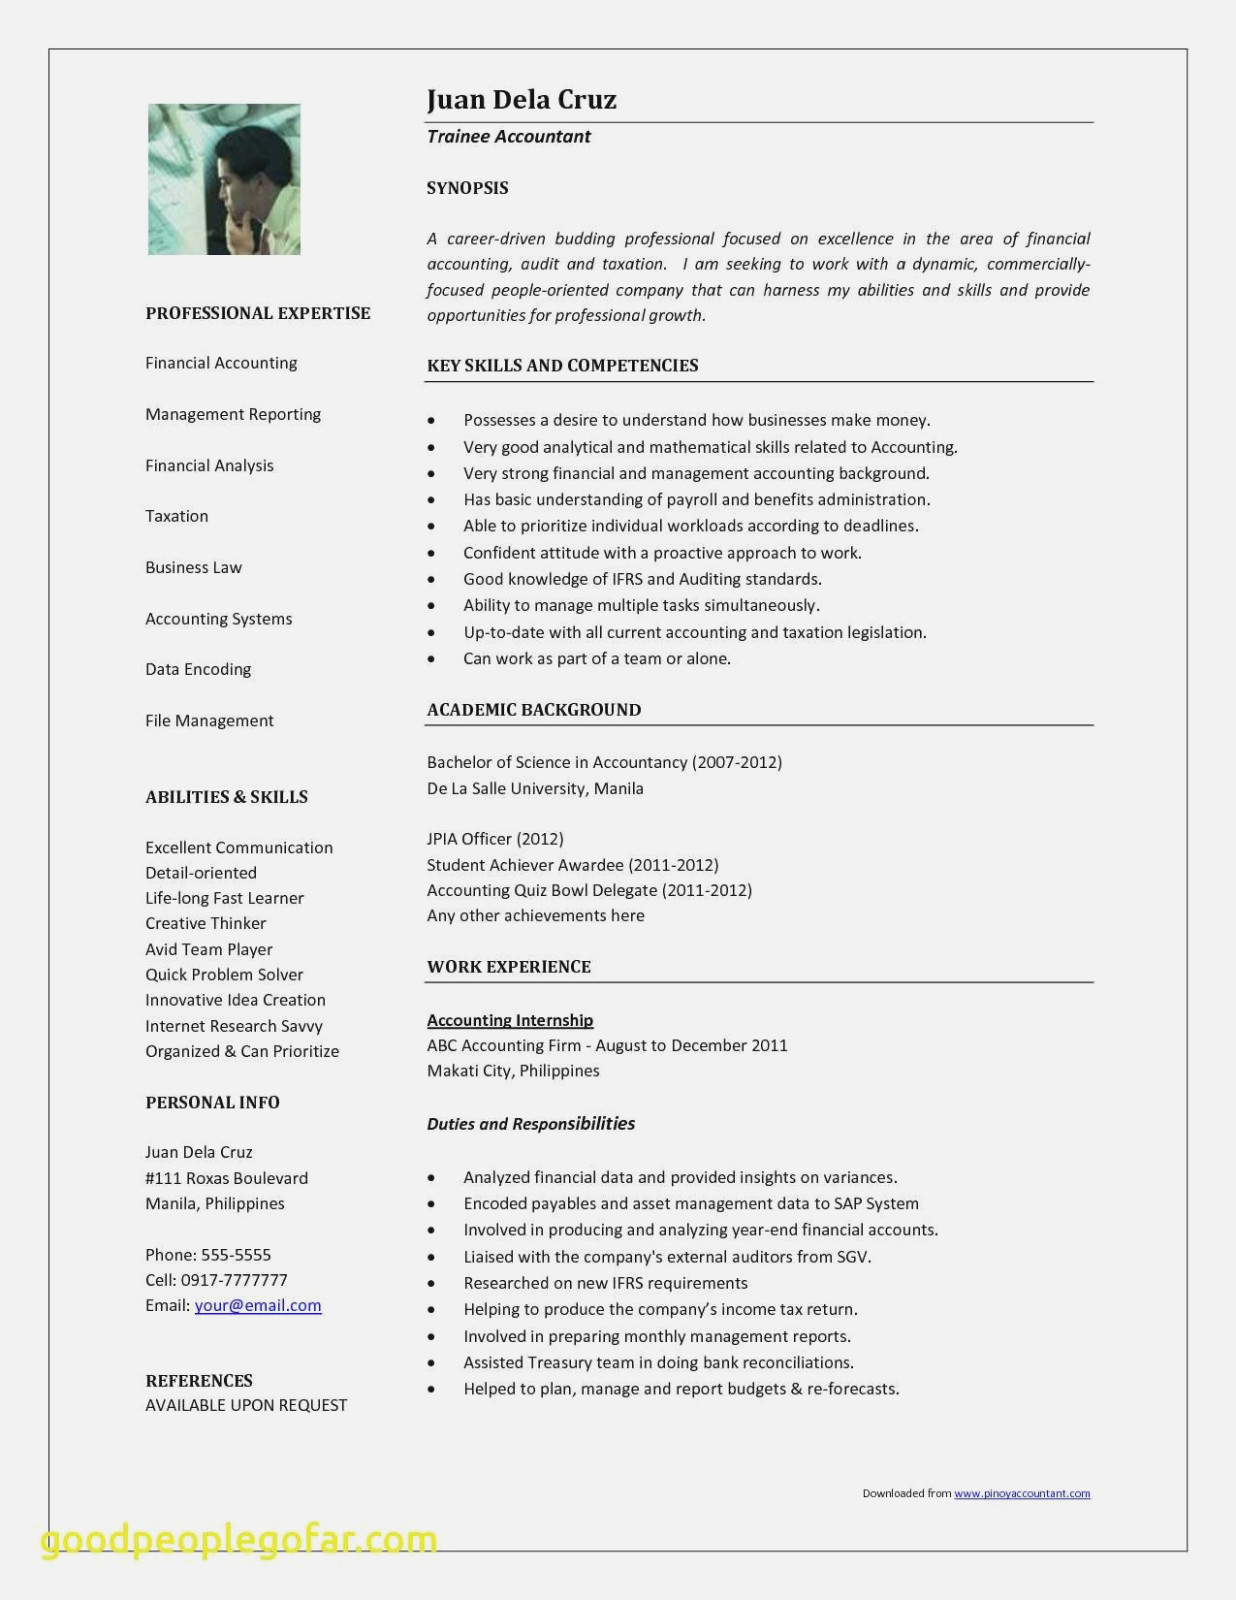 best accounting resume best accounting resumes 2019 best accounting resume format best accounting resume templates best accounting resume sample best accounting resume examples best accounting resume objective best accounting resumes 2020 best accounting resumes 2018 best accounting resume services